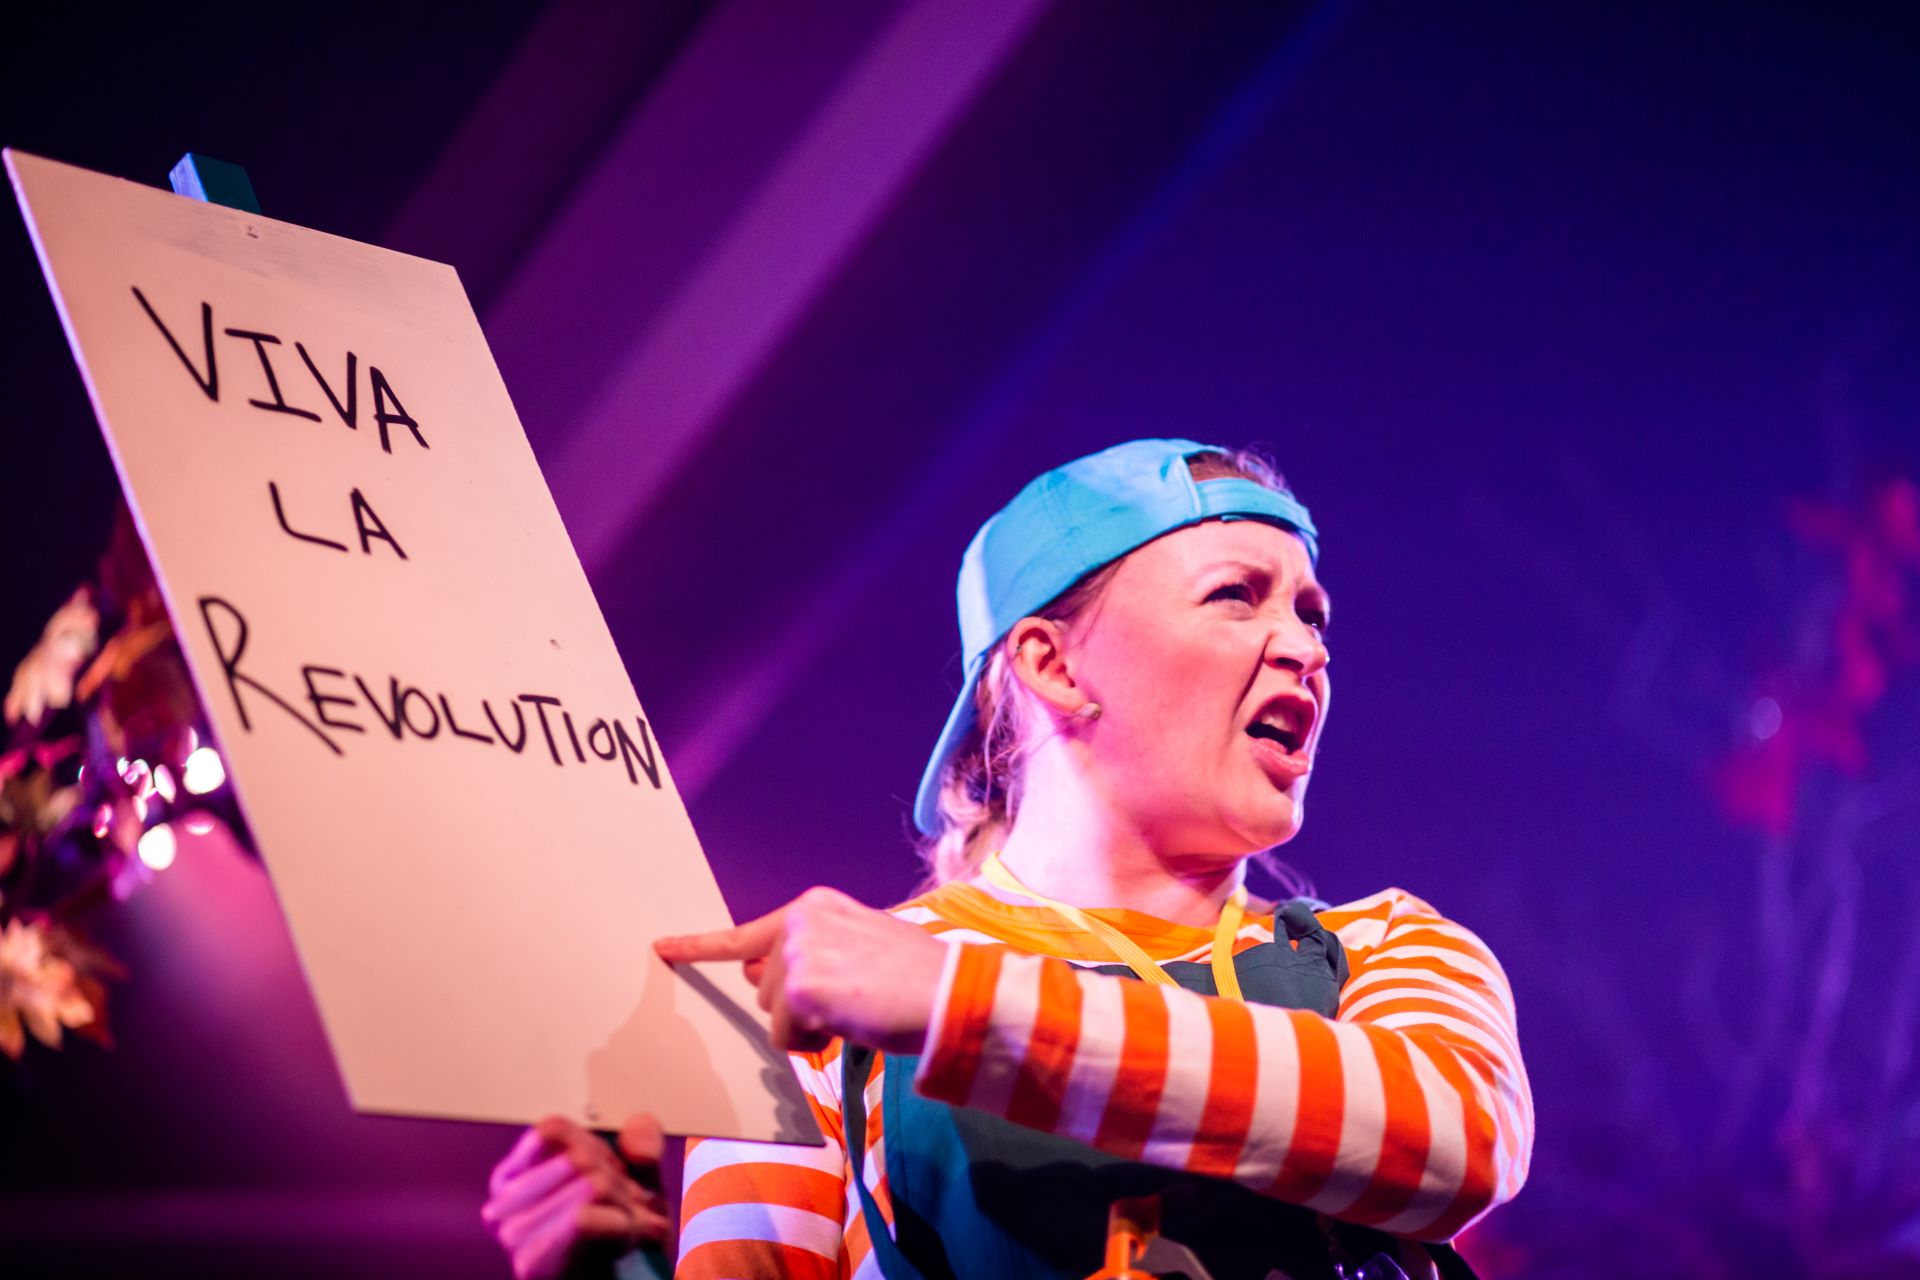 A white woman in stripey top, dungarees and backwards baseball cap holds a placard that says 'viva la revolution'